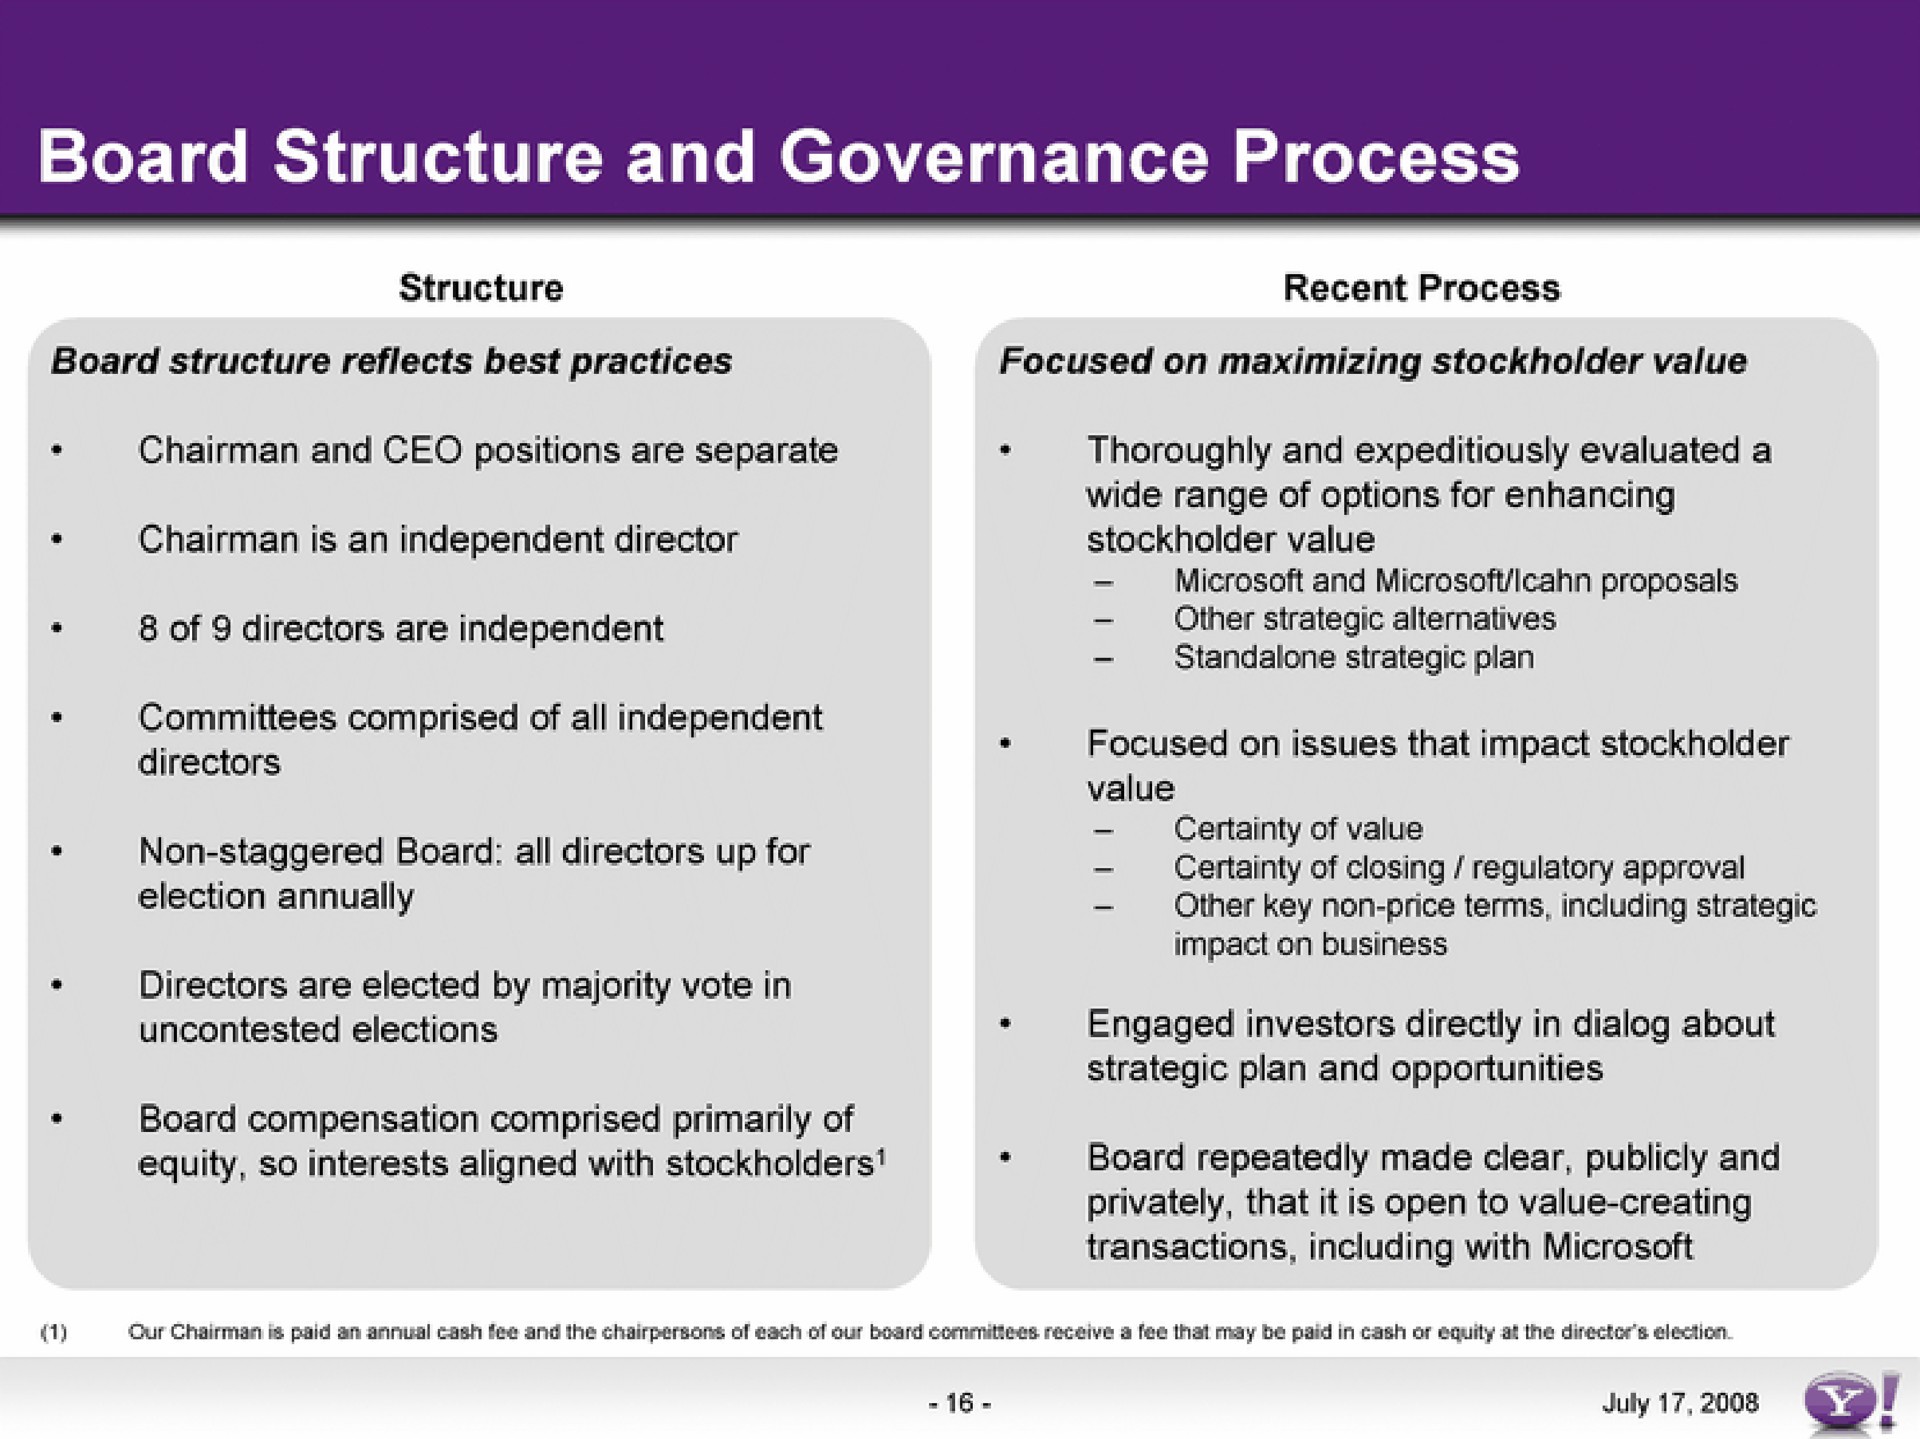 board structure and governance process | Yahoo